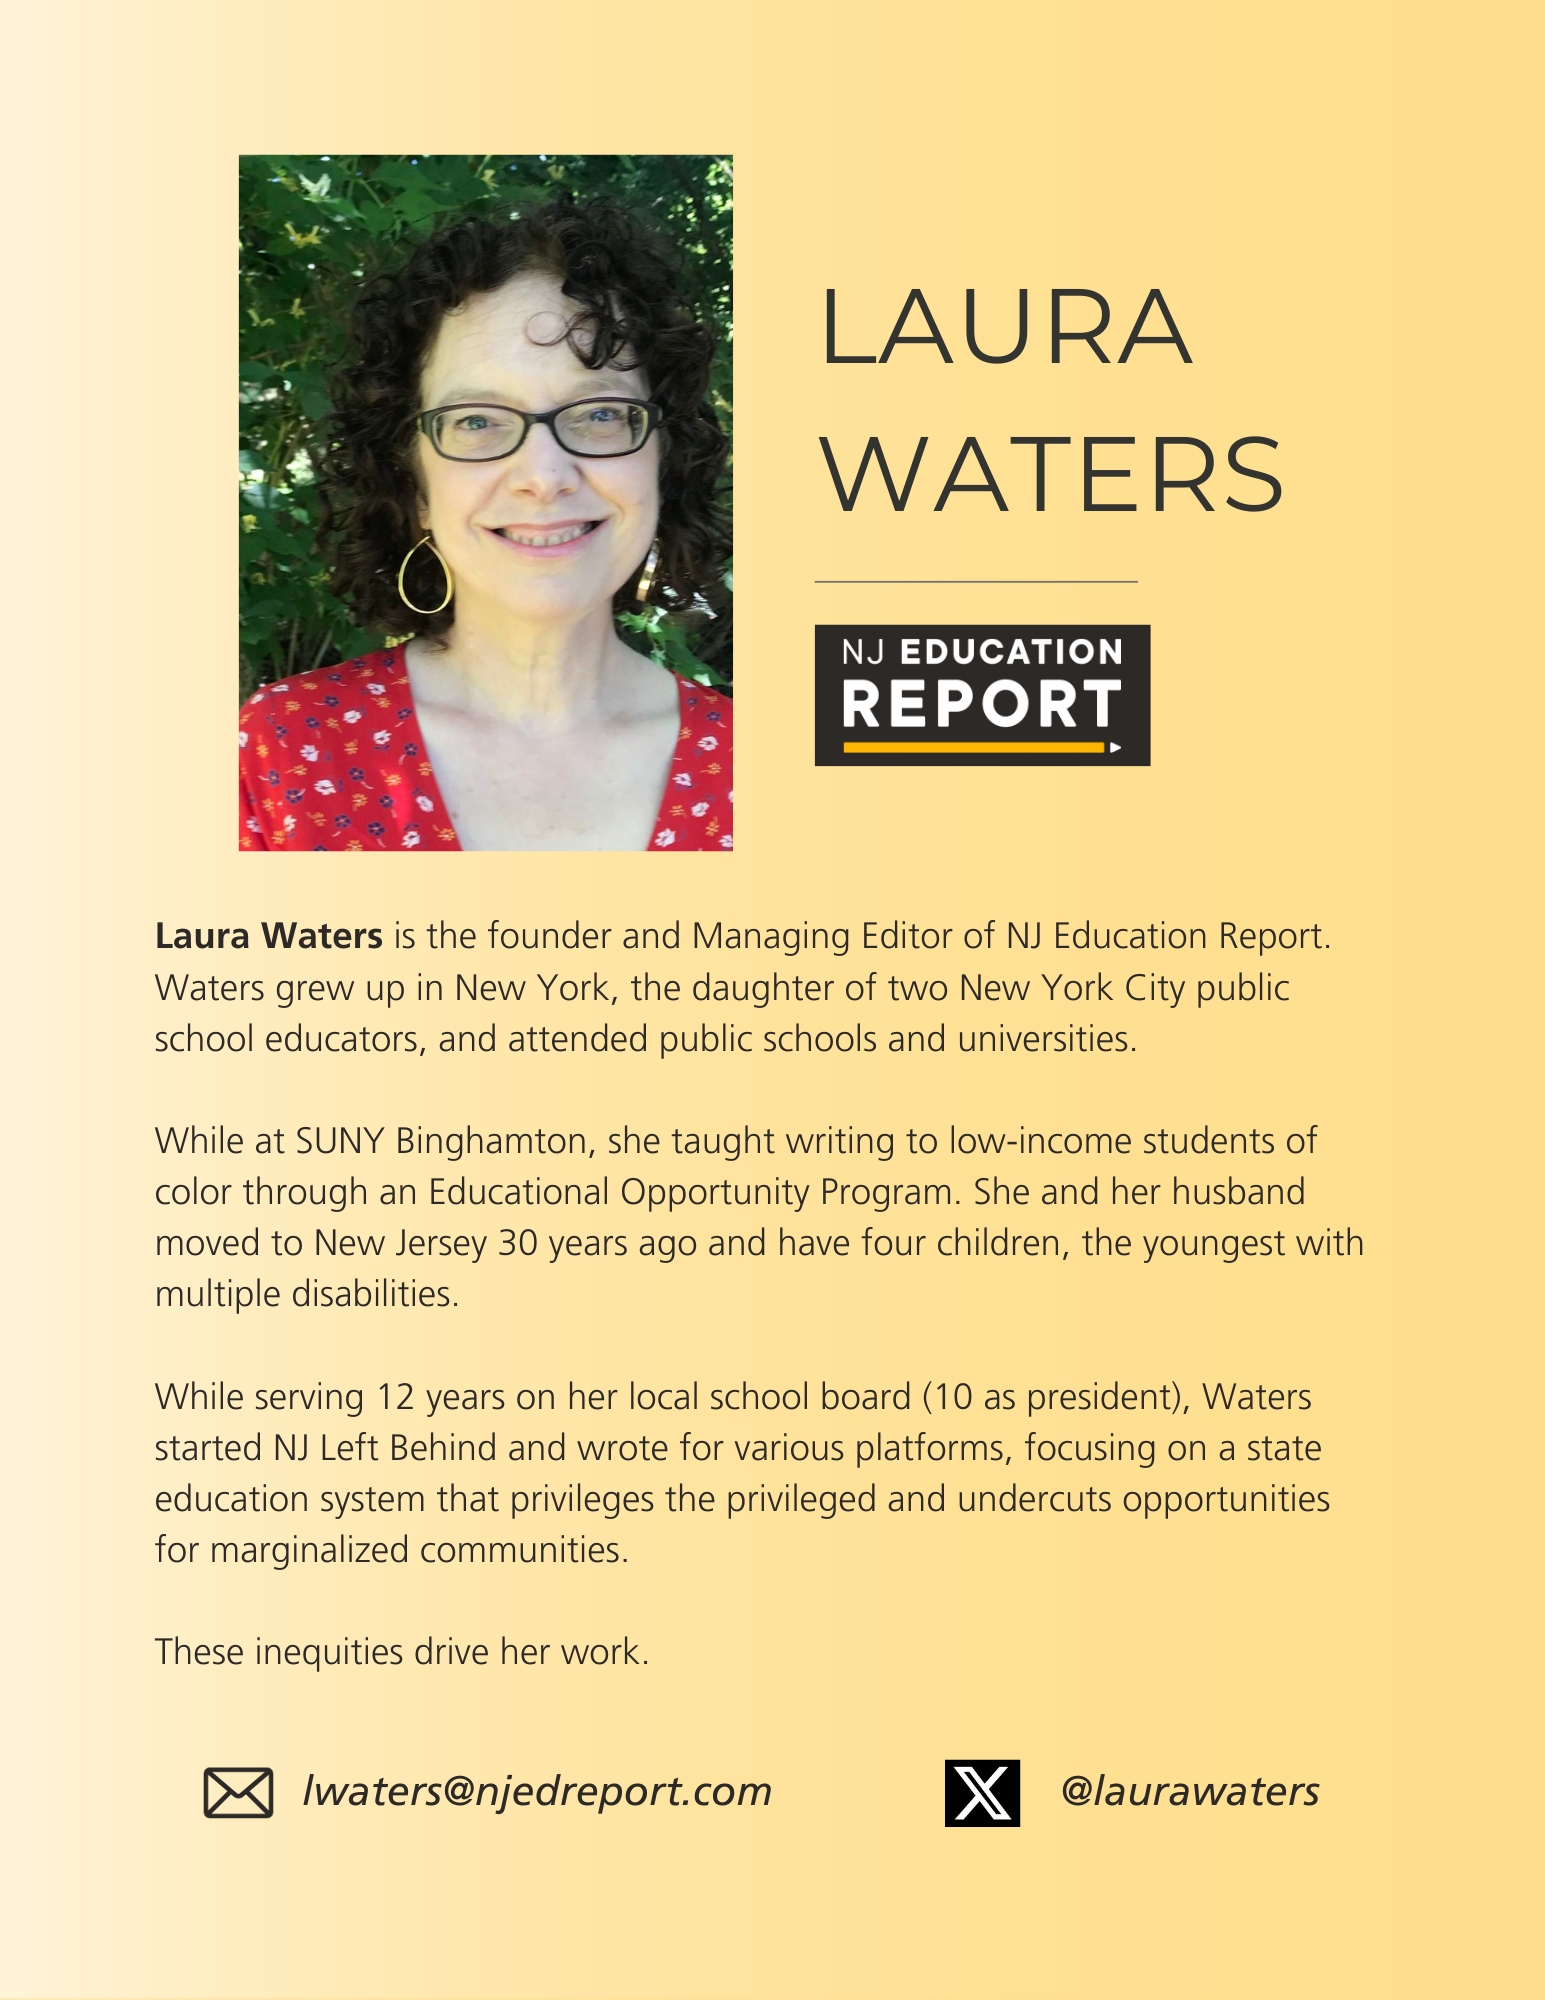 About Laura Waters | Founder & Managing Editor, NJ Education Report